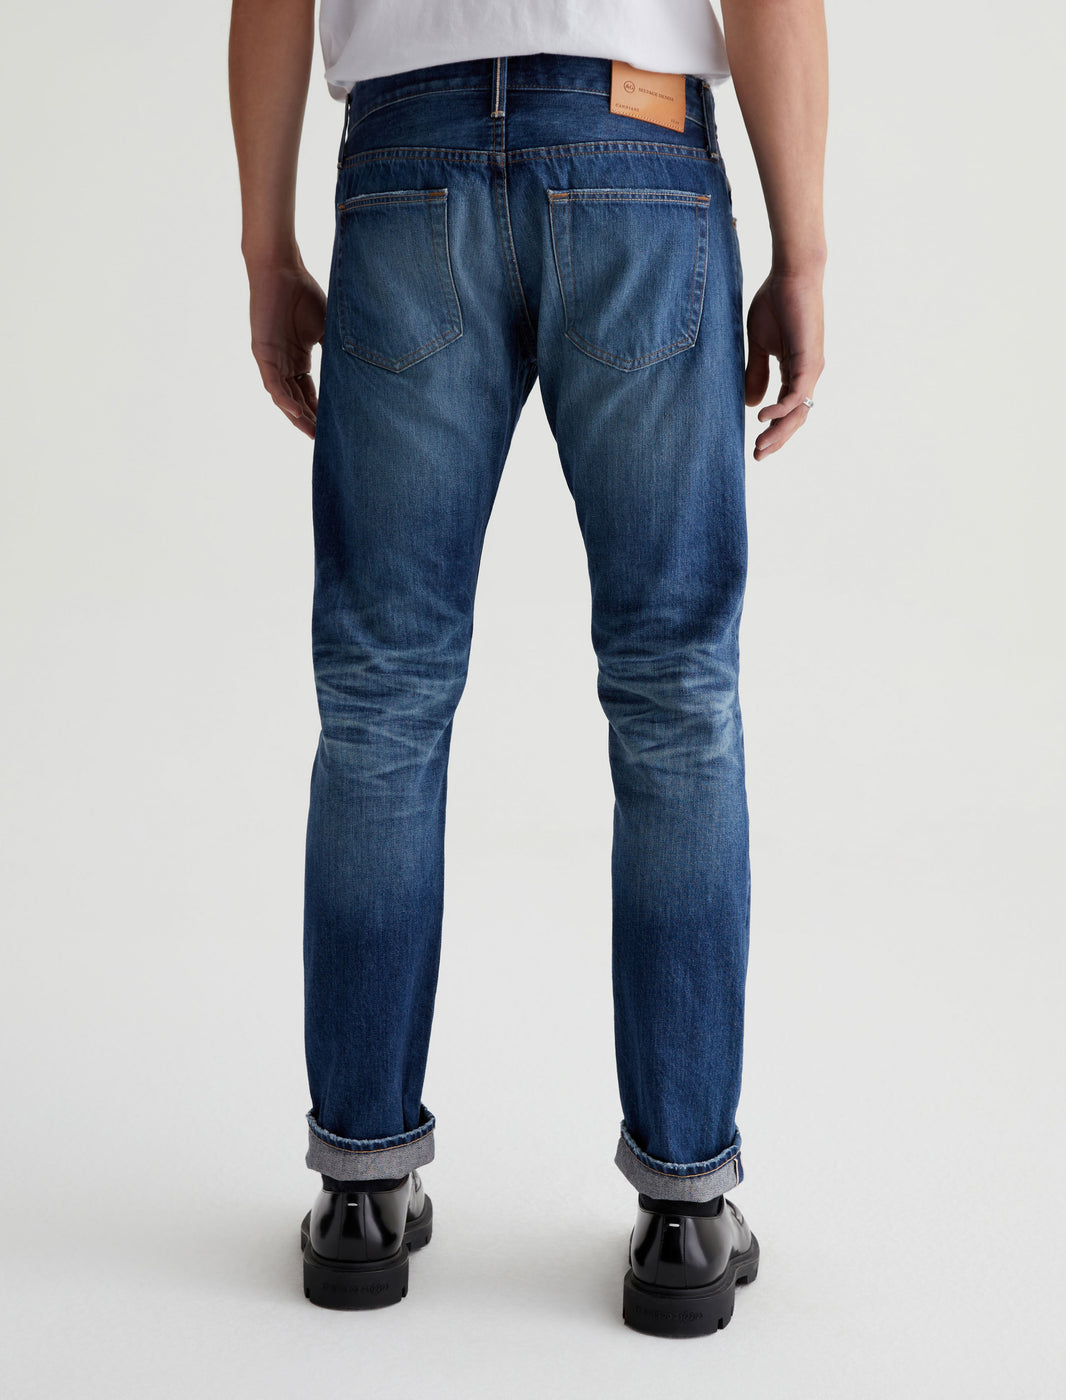 Store at Mens Official Years 10 Miyagi Jeans Selvage AG Tellis